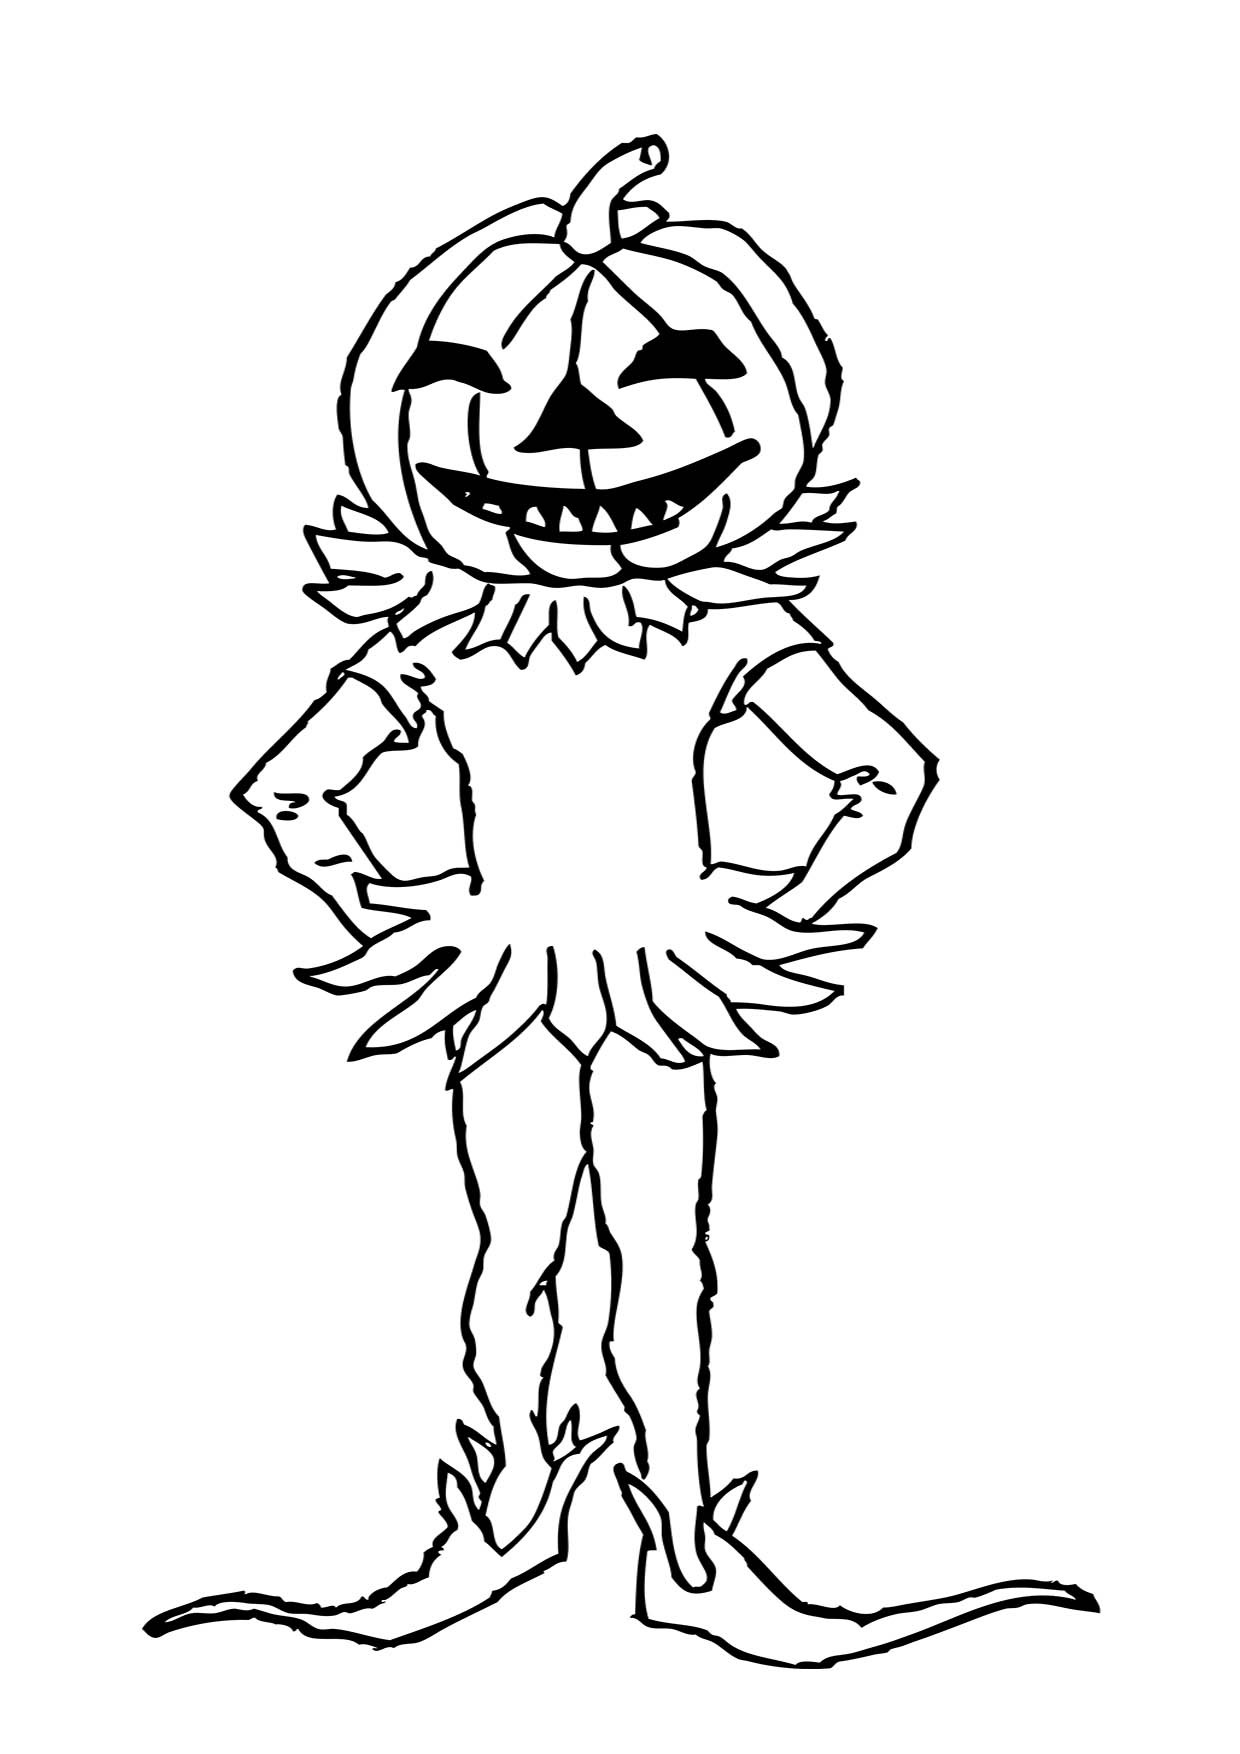 Pumpkin Coloring Sheets For Boys
 Halloween Coloring Pages